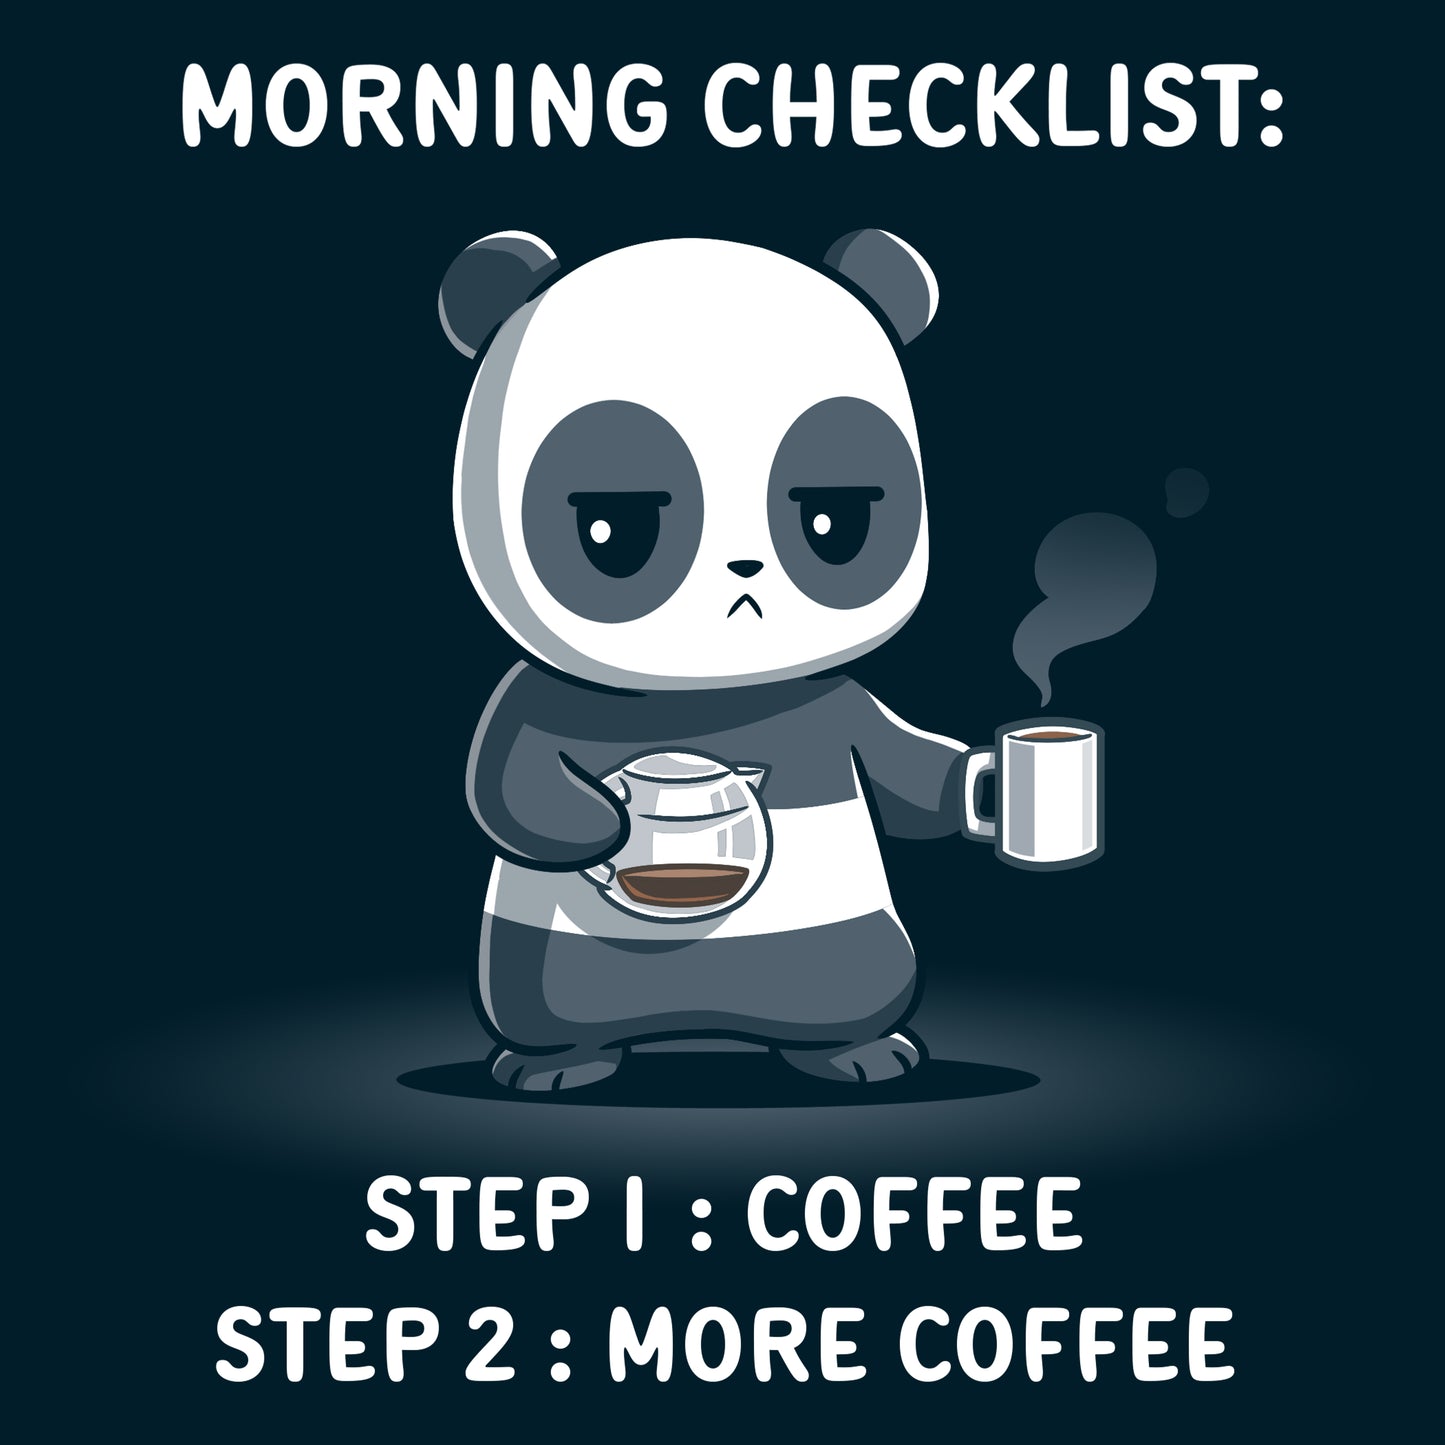 Illustration of a sleepy panda holding a coffee cup and a coffee pot with text: Morning Checklist: Step 1: Coffee, Step 2: More Coffee. Printed on a super soft ringspun cotton navy blue t-shirt from monsterdigital's Morning Checklist collection.